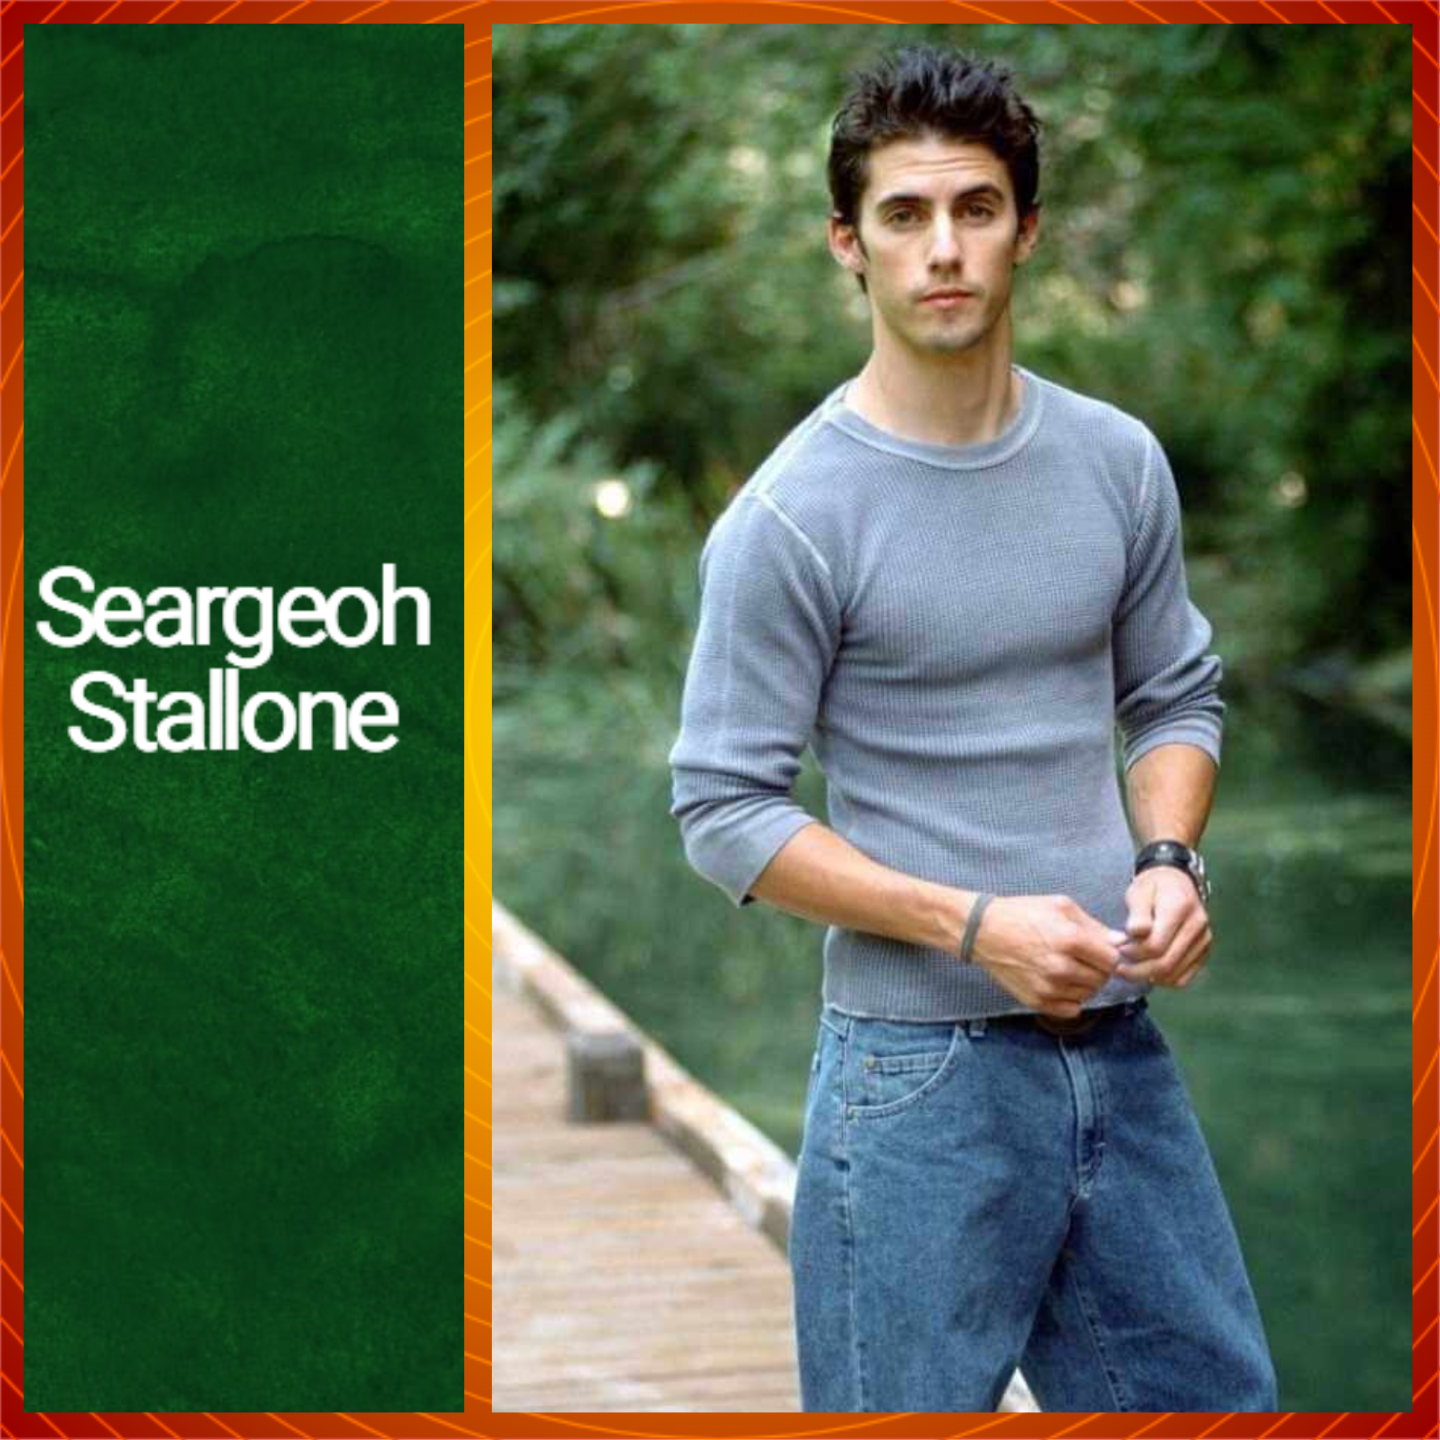 Seargeoh Stallone All You Need To Know About Sylveste